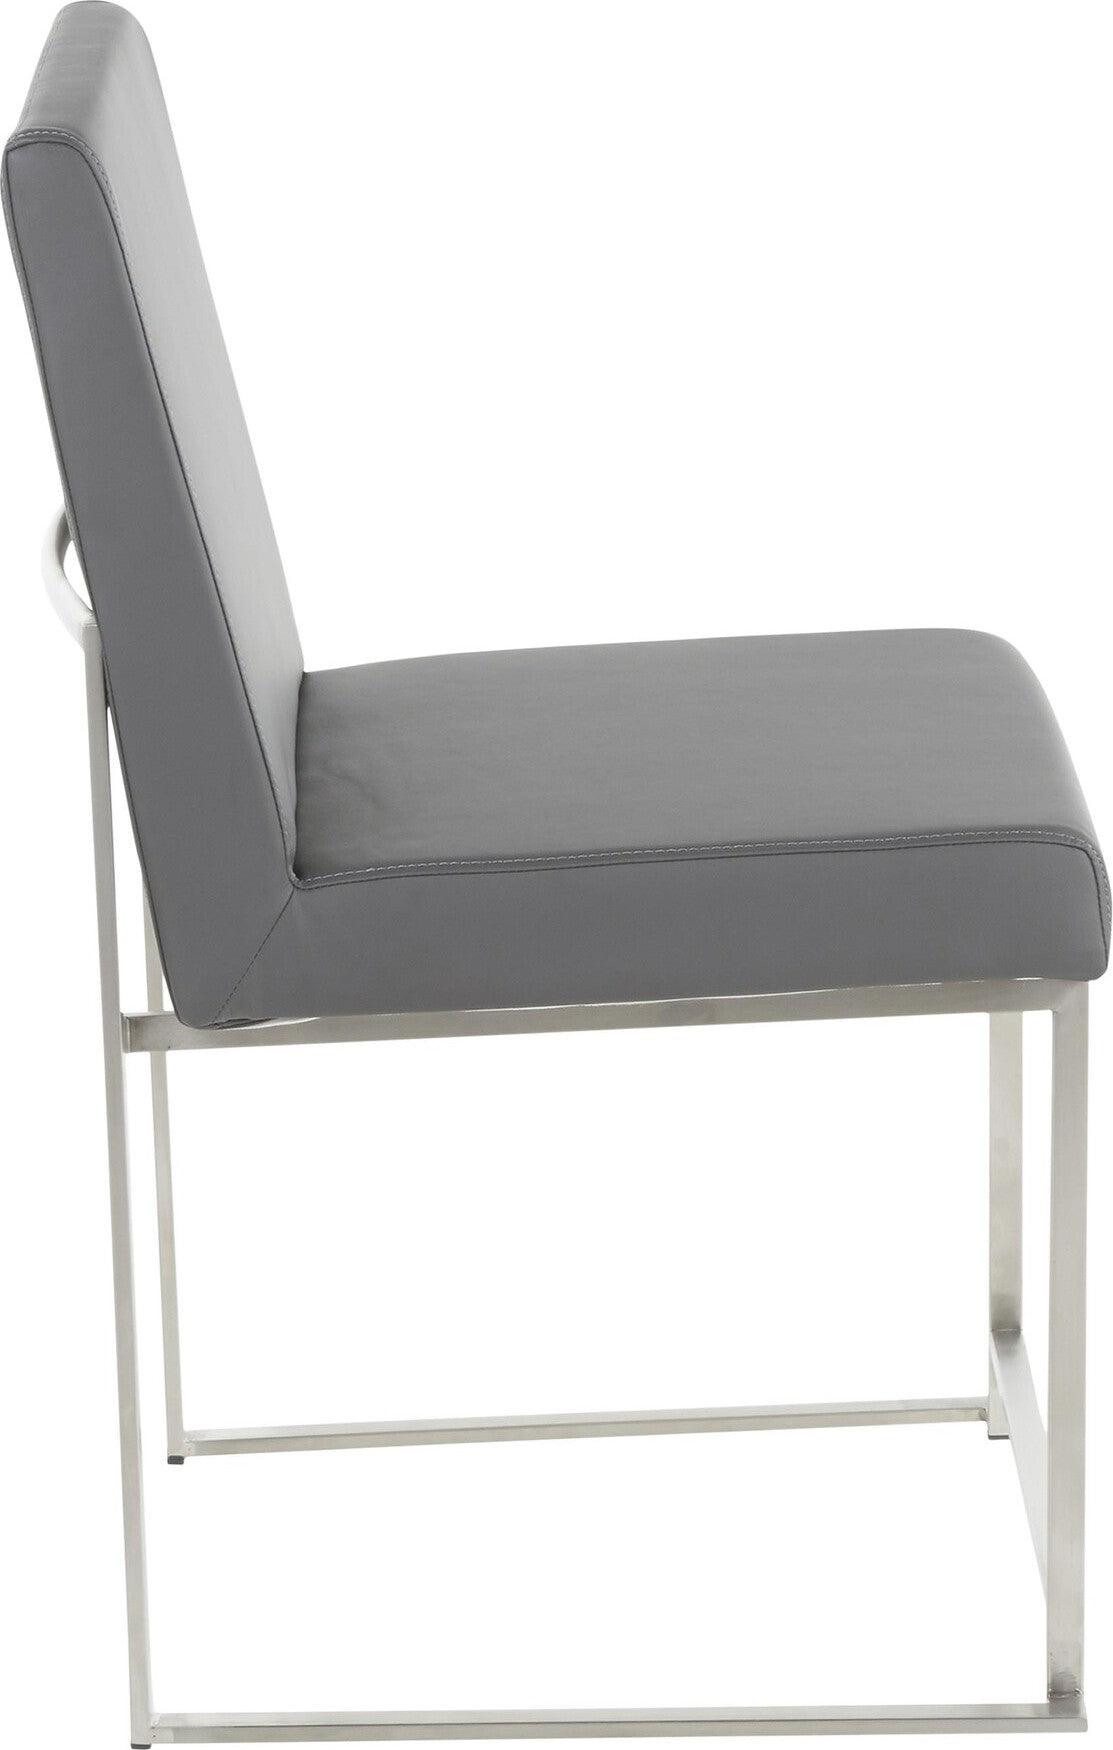 Lumisource Dining Chairs - High Back Fuji Contemporary Dining Chair in Stainless Steel and Grey Faux Leather (Set of 2)